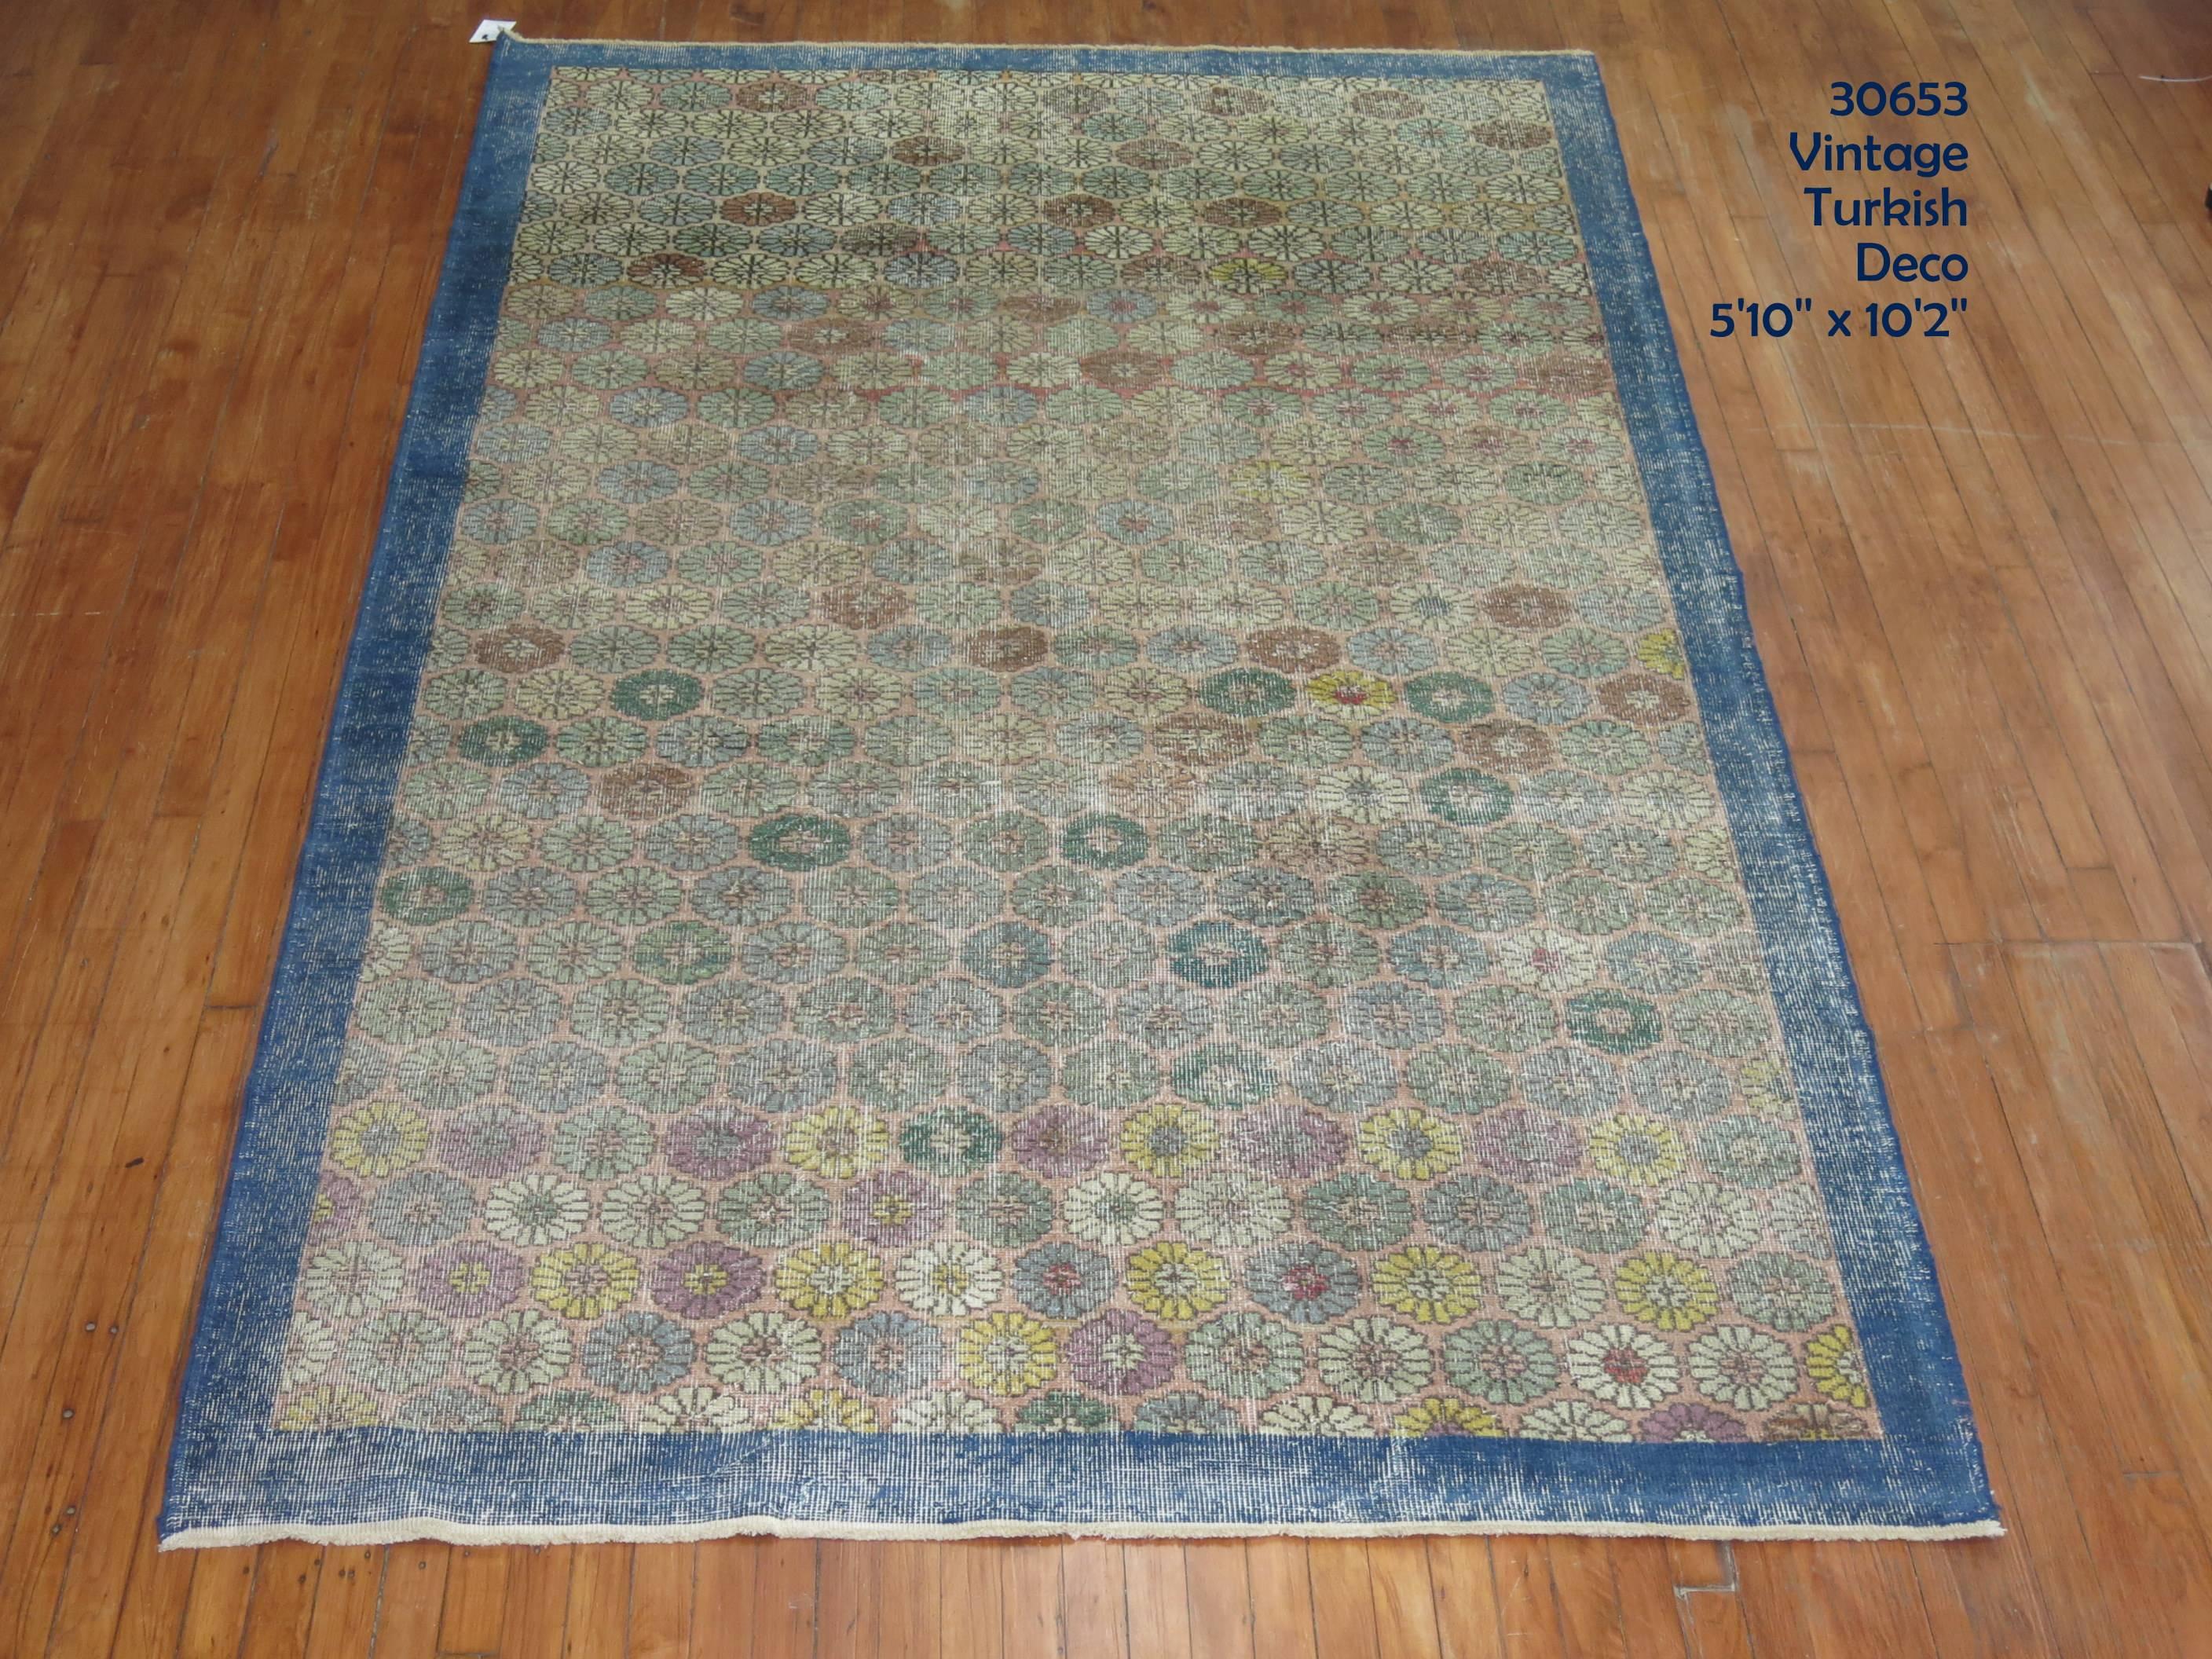 Room to intermediate size Turkish deco rug with a repetitive small floral repetitive design throughout surrounded by a denim blue bolder.

5'10'' x 10'2''